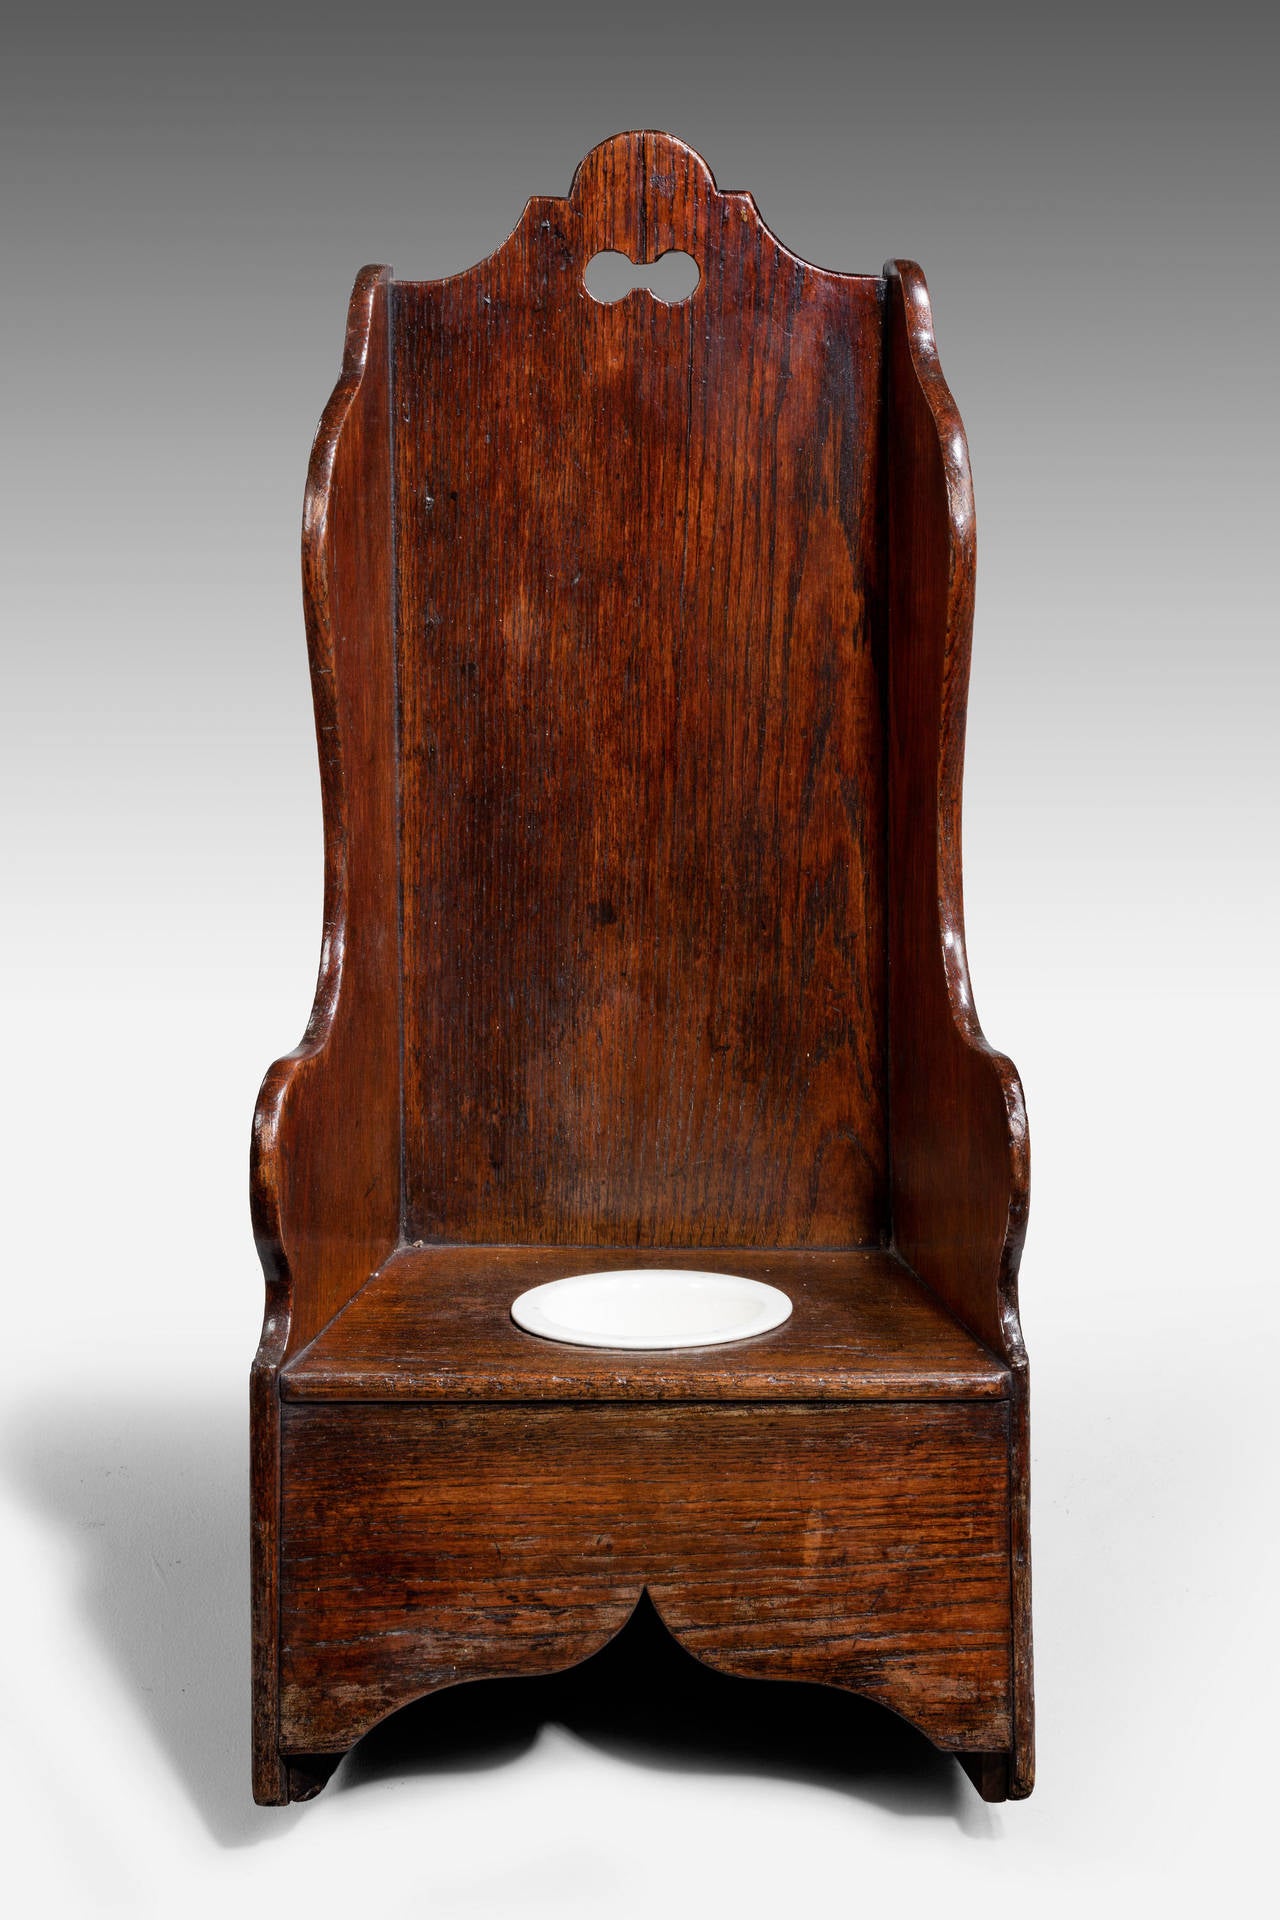 Mahogany Early 19th Century Childs Rocking Chair